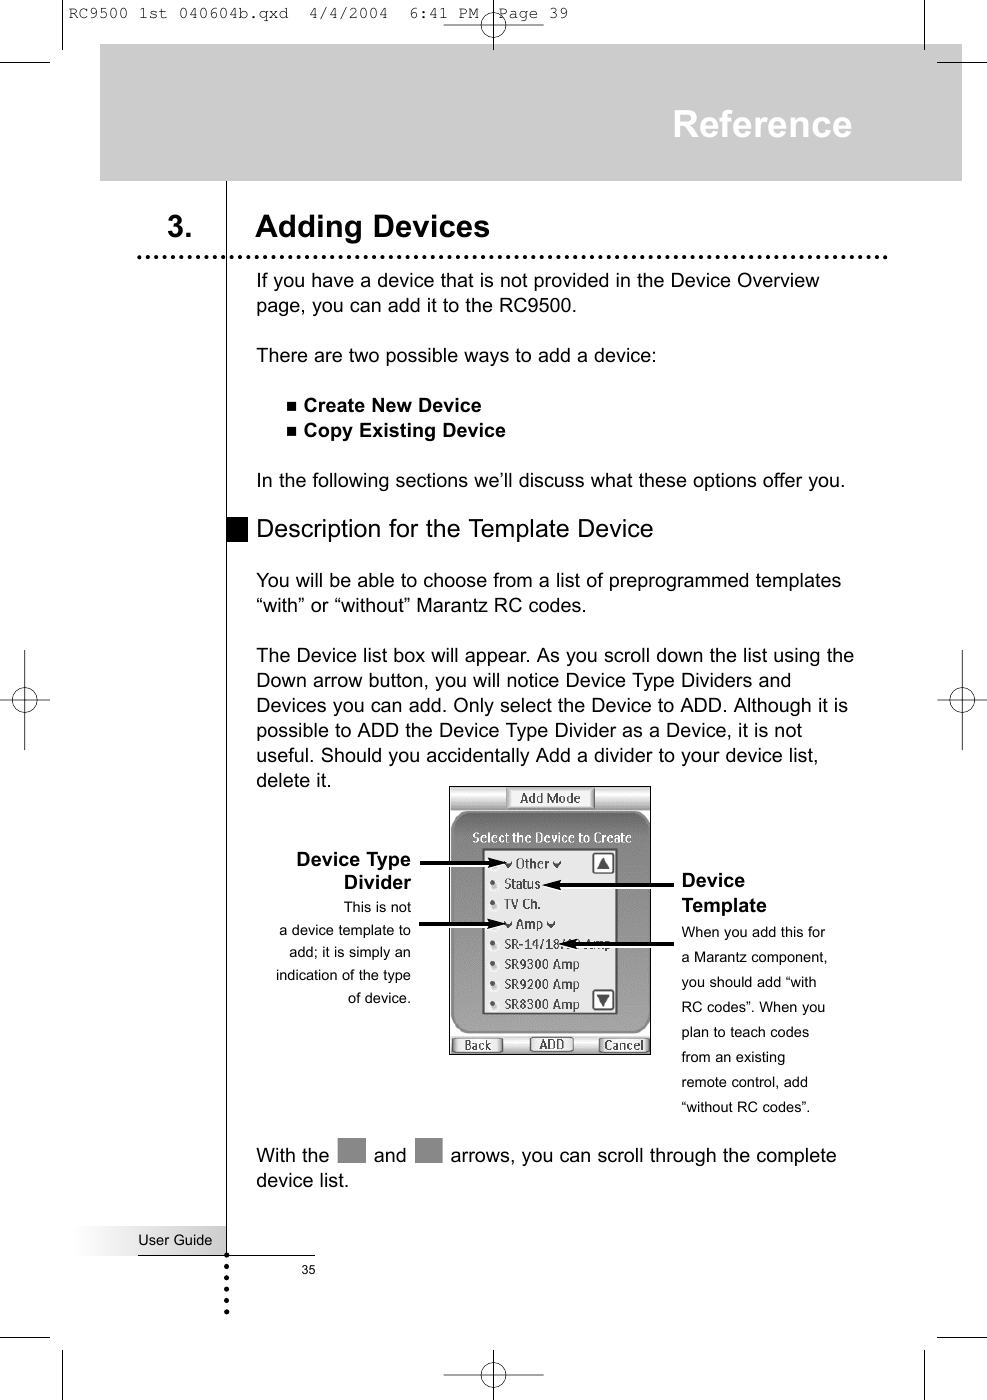 User Guide35If you have a device that is not provided in the Device Overviewpage, you can add it to the RC9500.There are two possible ways to add a device:Create New DeviceCopy Existing DeviceIn the following sections we’ll discuss what these options offer you.Description for the Template DeviceYou will be able to choose from a list of preprogrammed templates“with” or “without” Marantz RC codes.The Device list box will appear. As you scroll down the list using theDown arrow button, you will notice Device Type Dividers andDevices you can add. Only select the Device to ADD. Although it ispossible to ADD the Device Type Divider as a Device, it is notuseful. Should you accidentally Add a divider to your device list,delete it.With the  and  arrows, you can scroll through the completedevice list.Reference3. Adding DevicesDevice TypeDividerThis is nota device template toadd; it is simply anindication of the typeof device.DeviceTemplate When you add this fora Marantz component,you should add “withRC codes”. When youplan to teach codesfrom an existingremote control, add“without RC codes”.RC9500 1st 040604b.qxd  4/4/2004  6:41 PM  Page 39